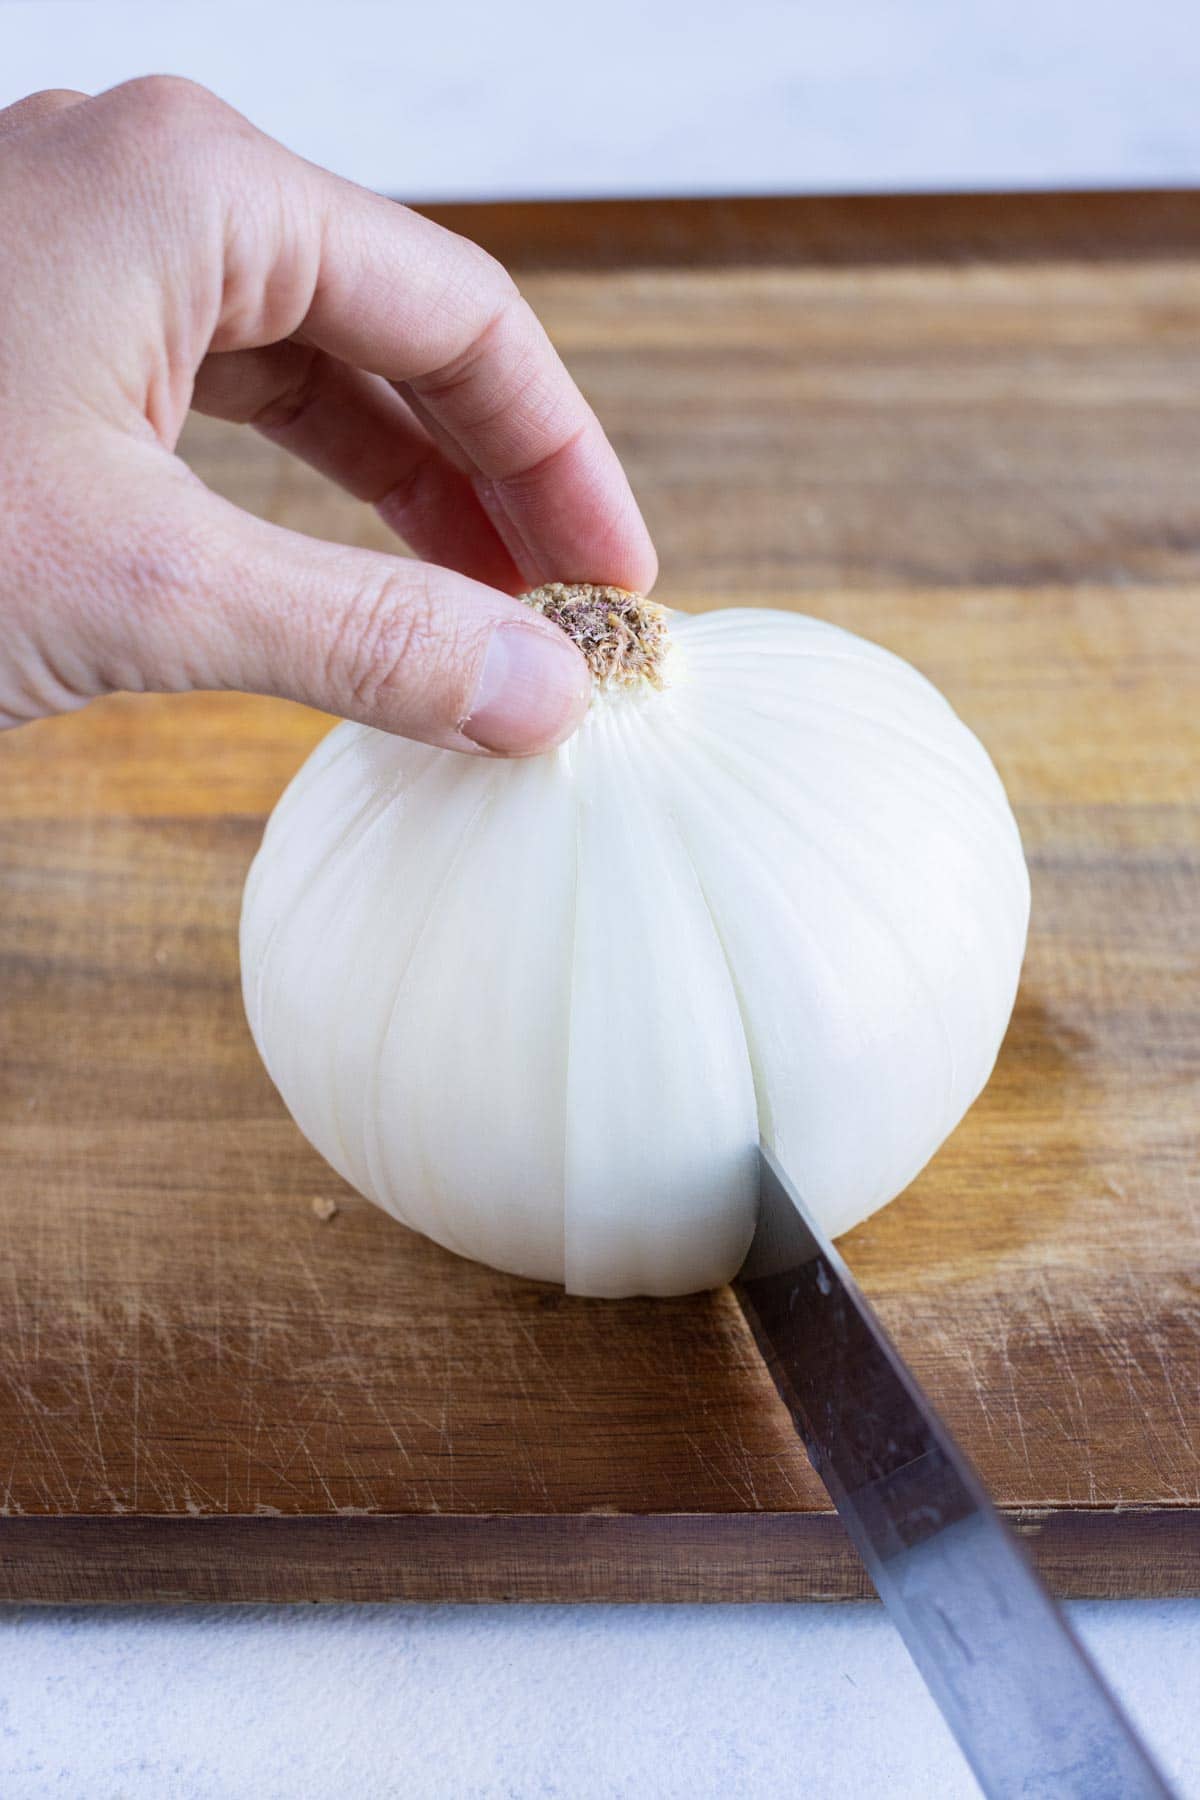 Onion is cut with a knife into petals.